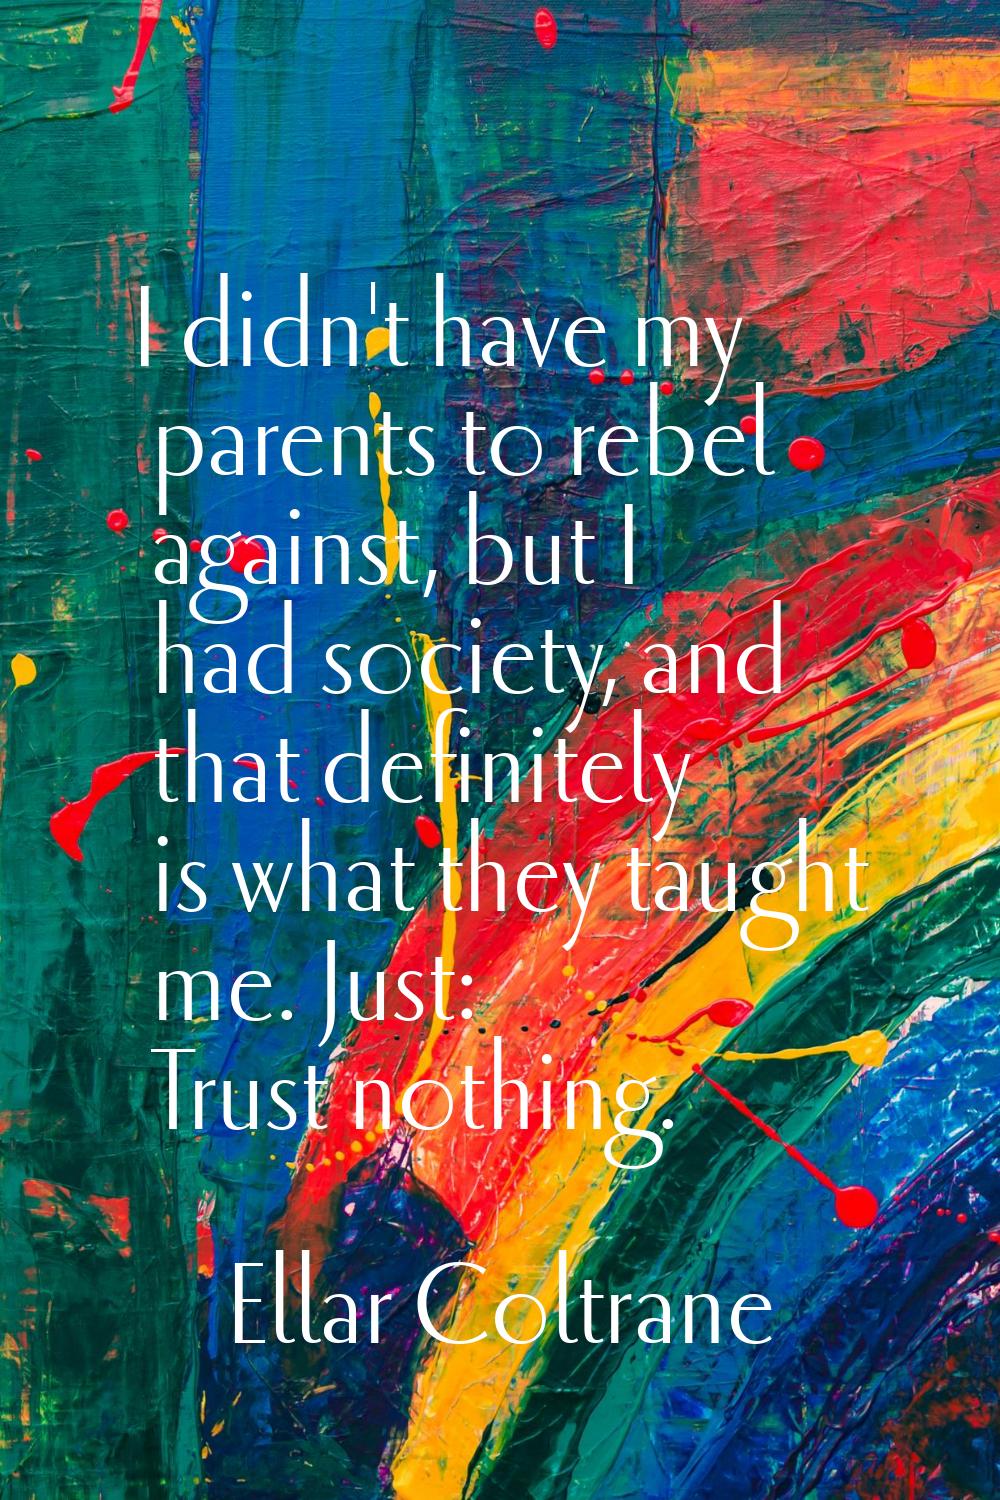 I didn't have my parents to rebel against, but I had society, and that definitely is what they taug